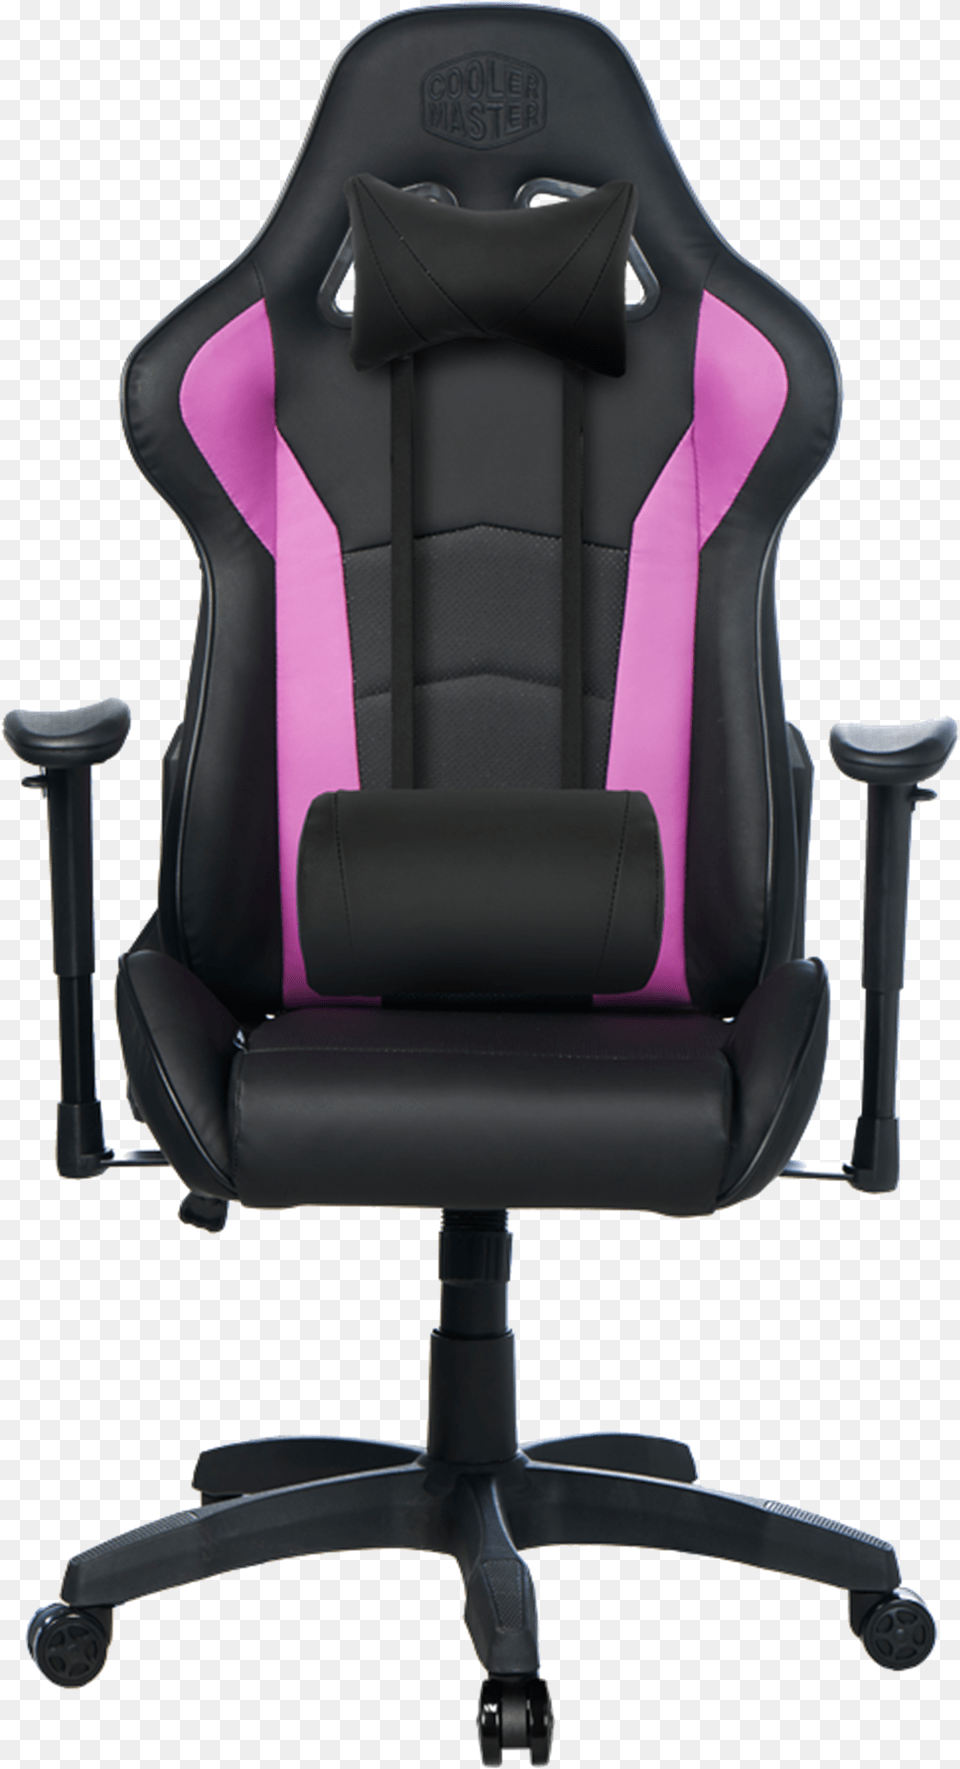 Cooler Master Gaming Chair, Cushion, Home Decor, Furniture Png